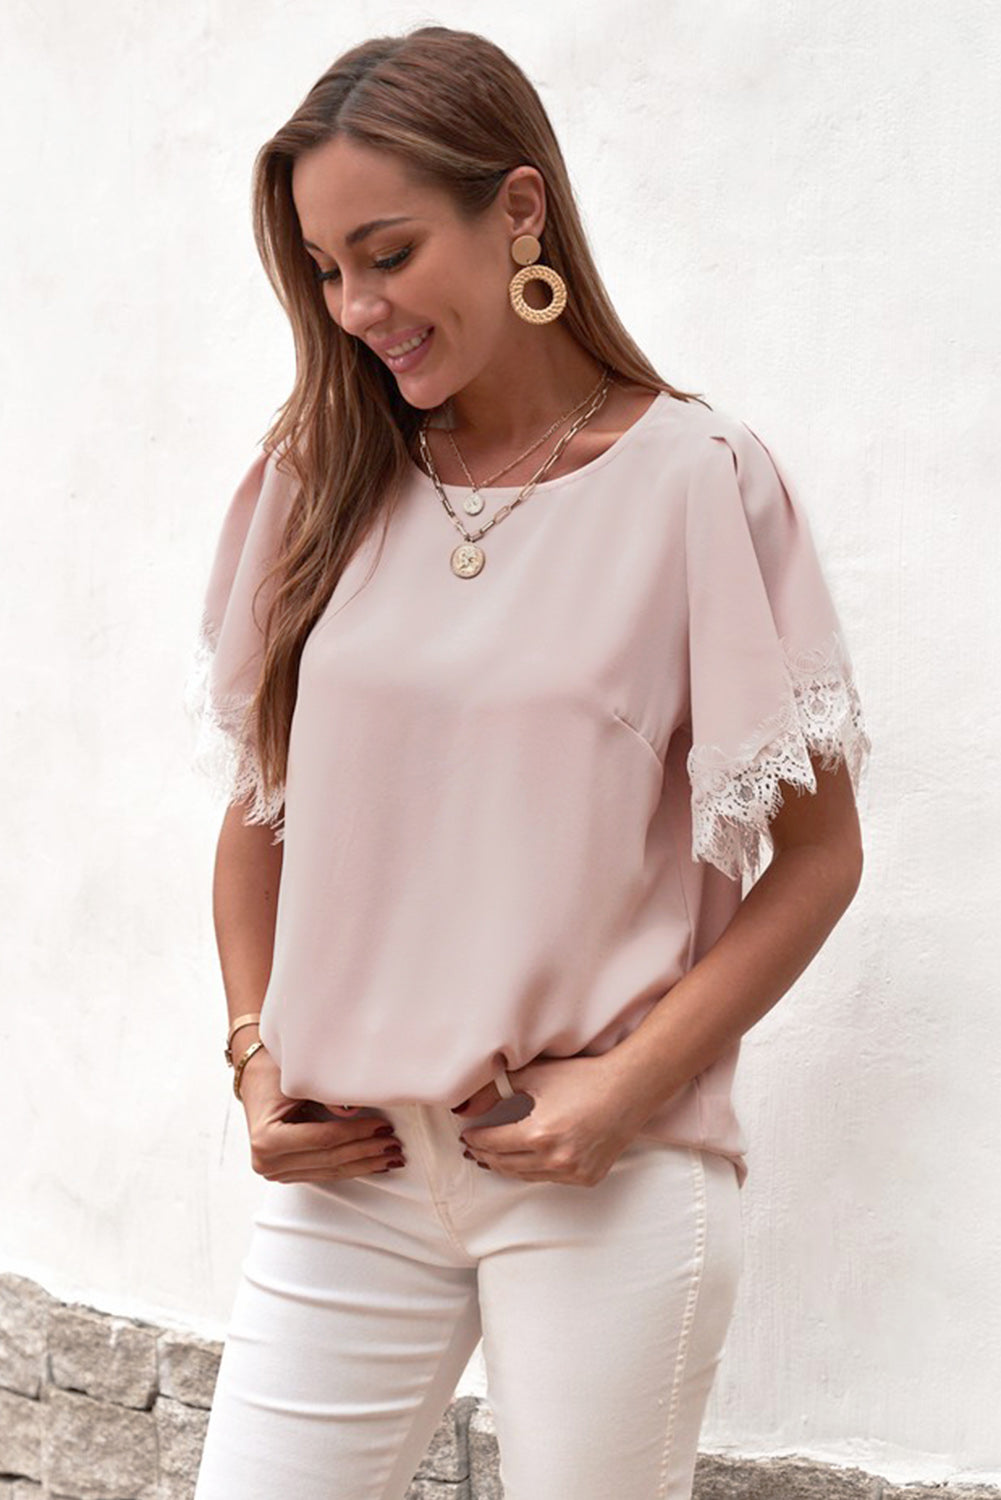 Lace Trim Flutter Sleeve Blouse - Online Only